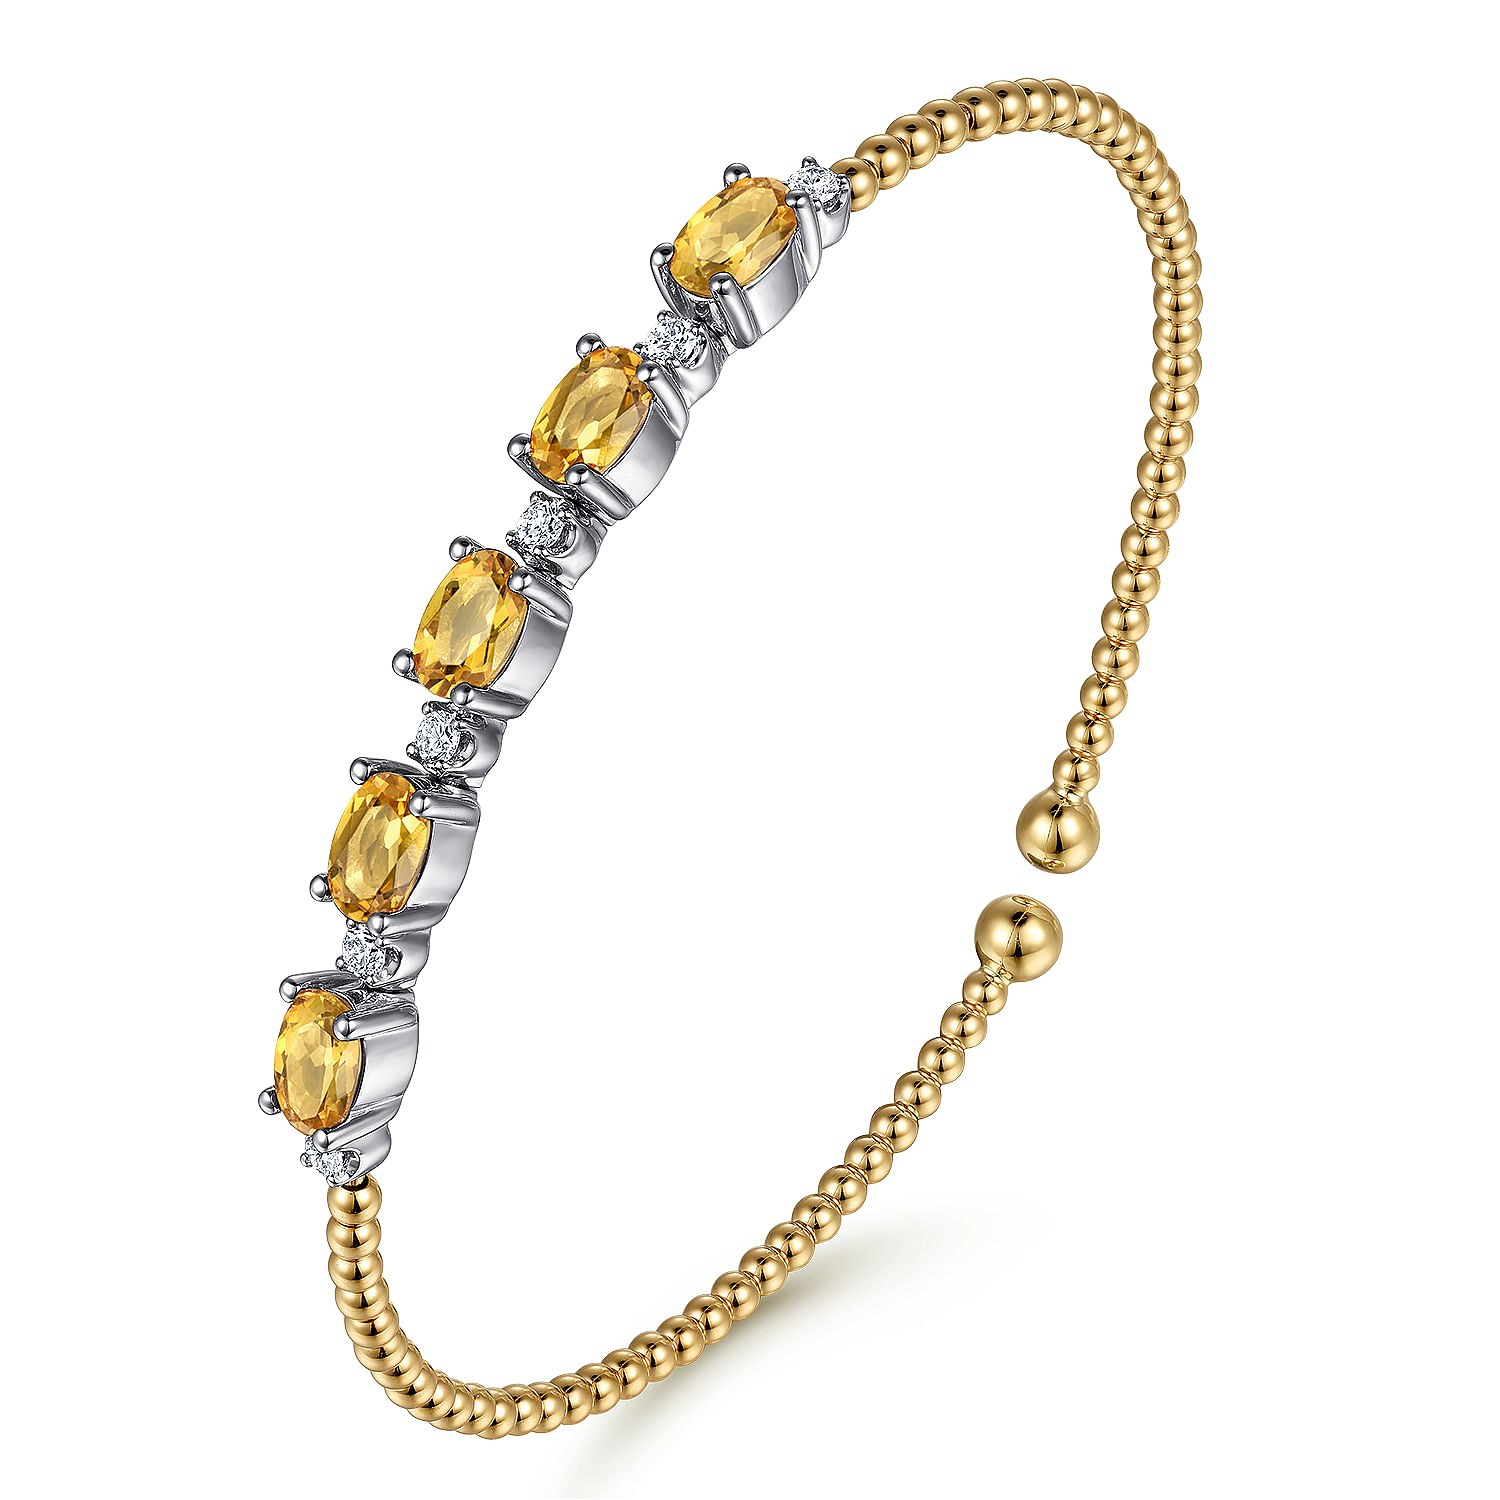 14K White-Yellow Gold Bujukan Bead Cuff Bracelet with Citrine and Diamond Stations